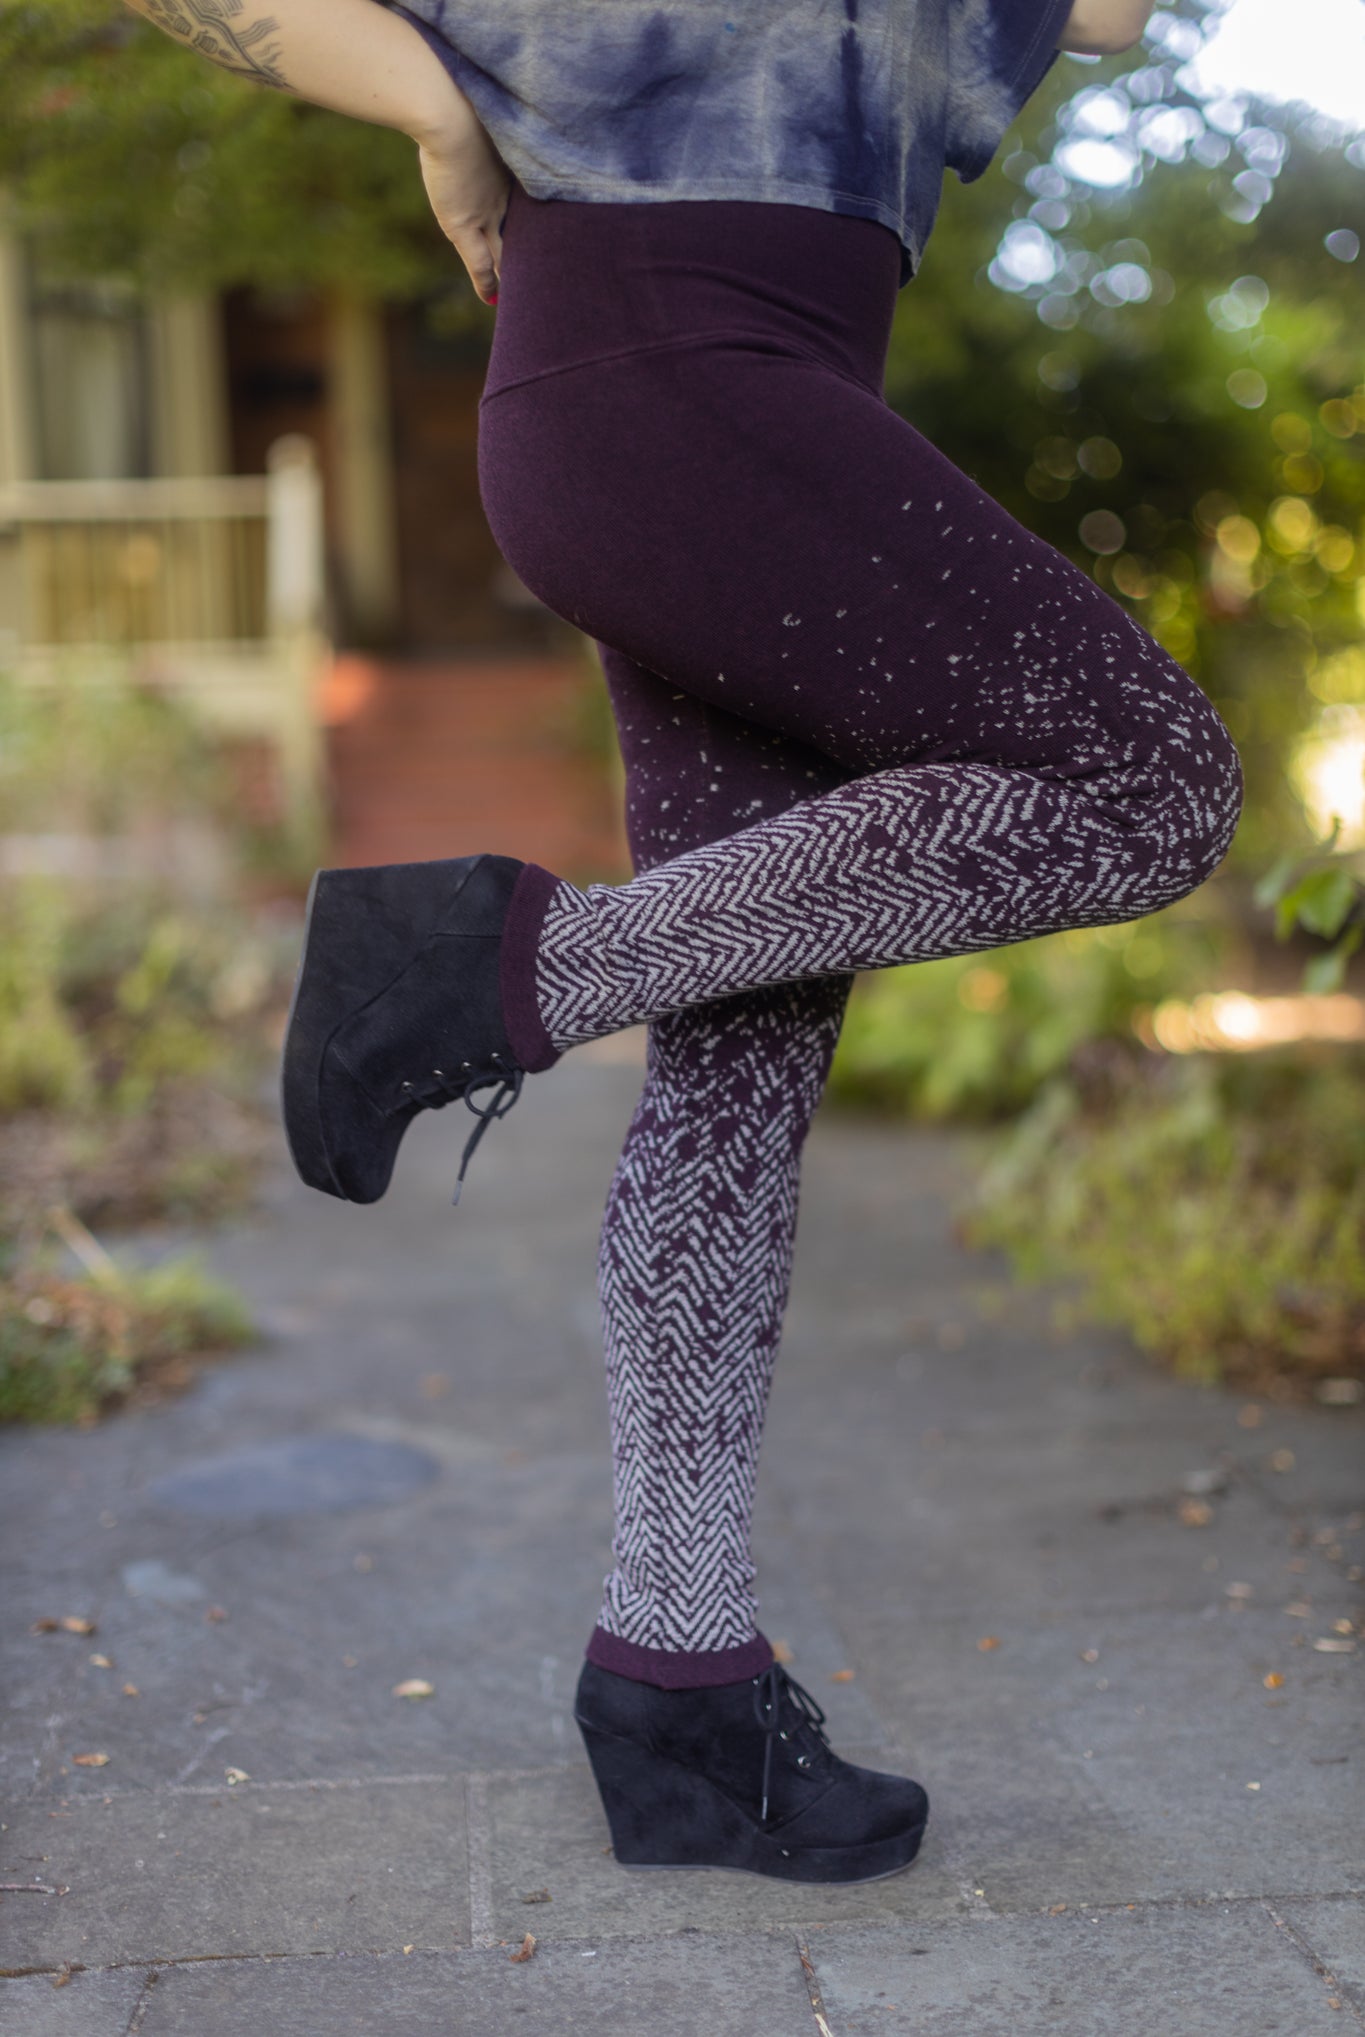 The Ombre Leopard Cinched Waist 7/8 Leggings  Legging, High waisted  leggings, Cinched waist